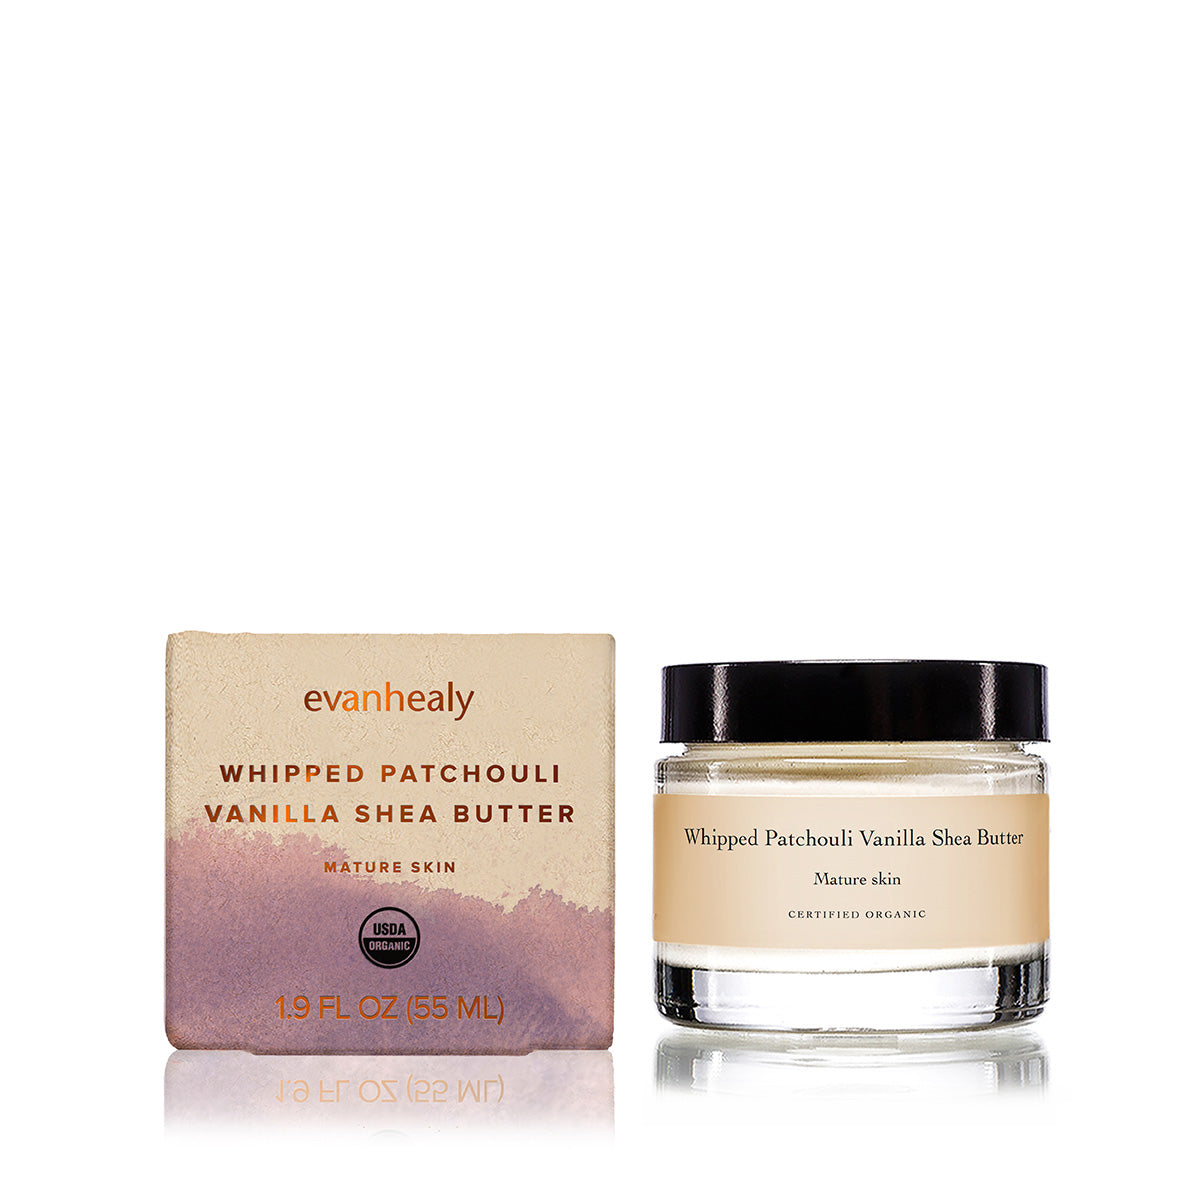 evanhealy whipped patchouli vanilla shea butter facial moisturizer for face with box